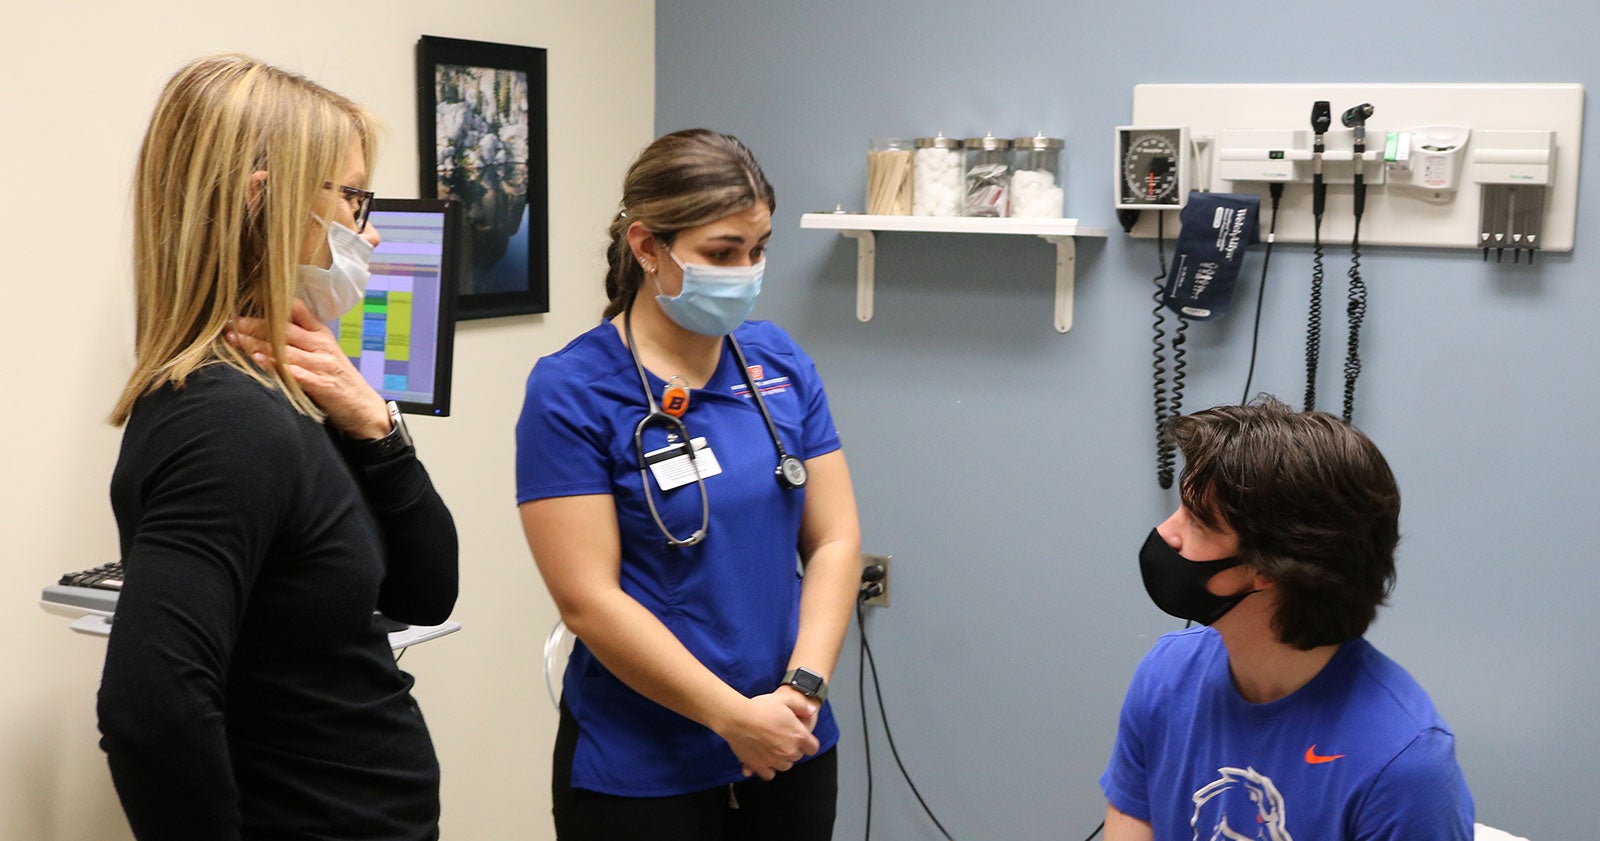 Julee Huesby, Health Services nurse, supervises nursing student Natalie Cacchillo while interacting with patient